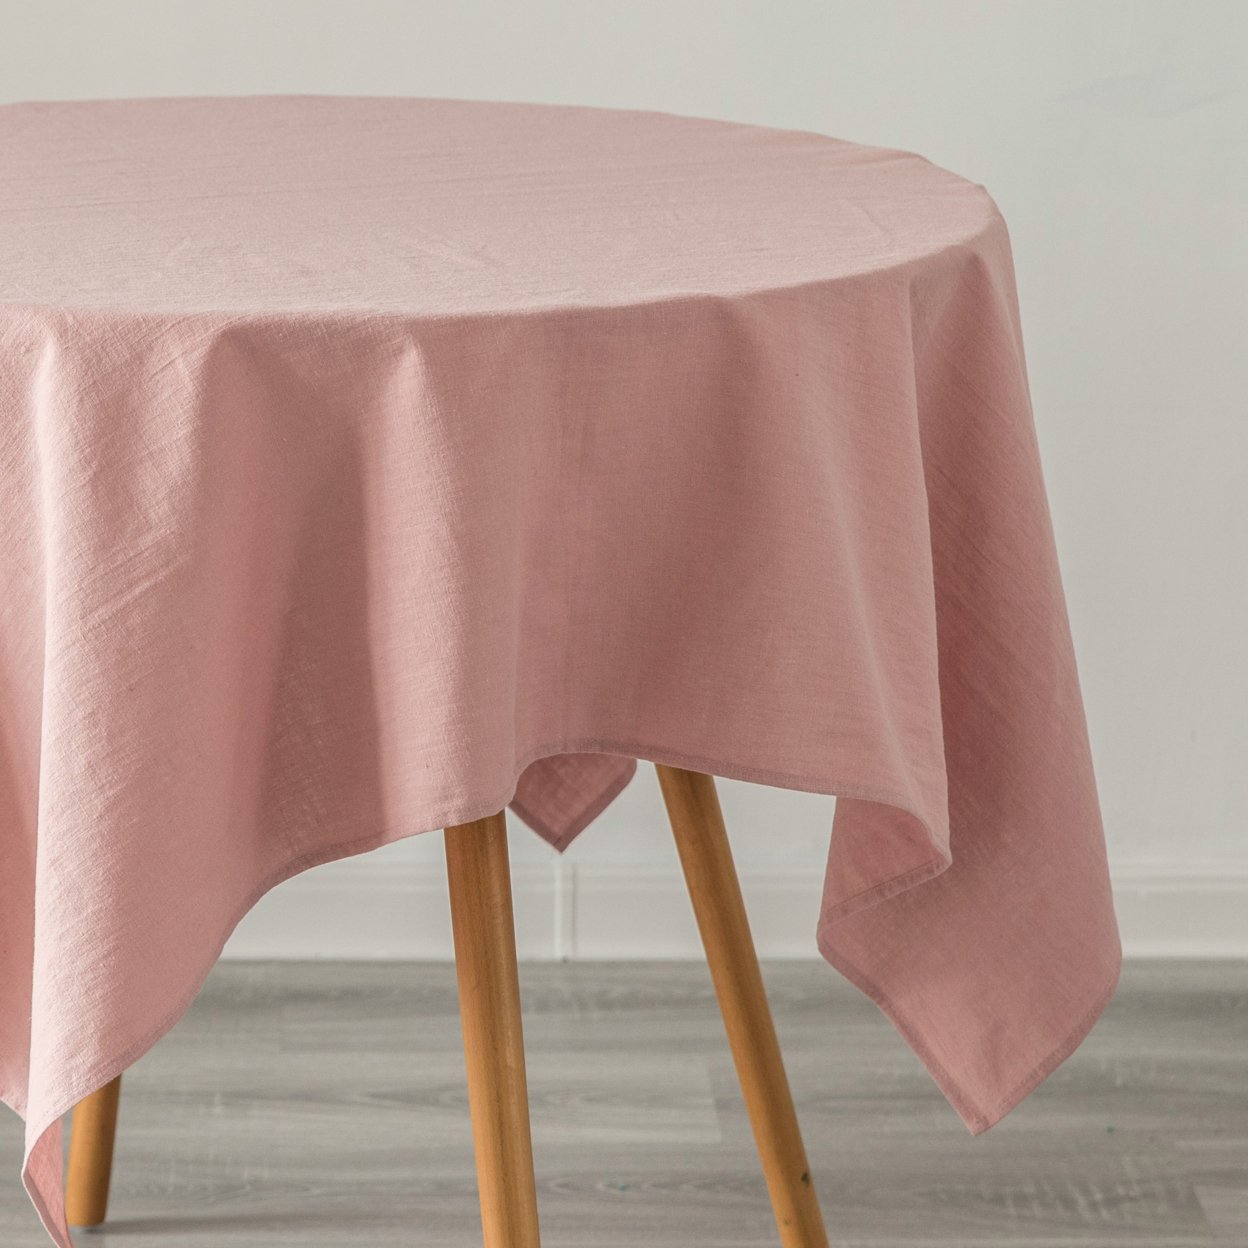 Deerlux 100 Percent Pure Linen Washable Tablecloth Solid Color - 52 X 52 In. Pink